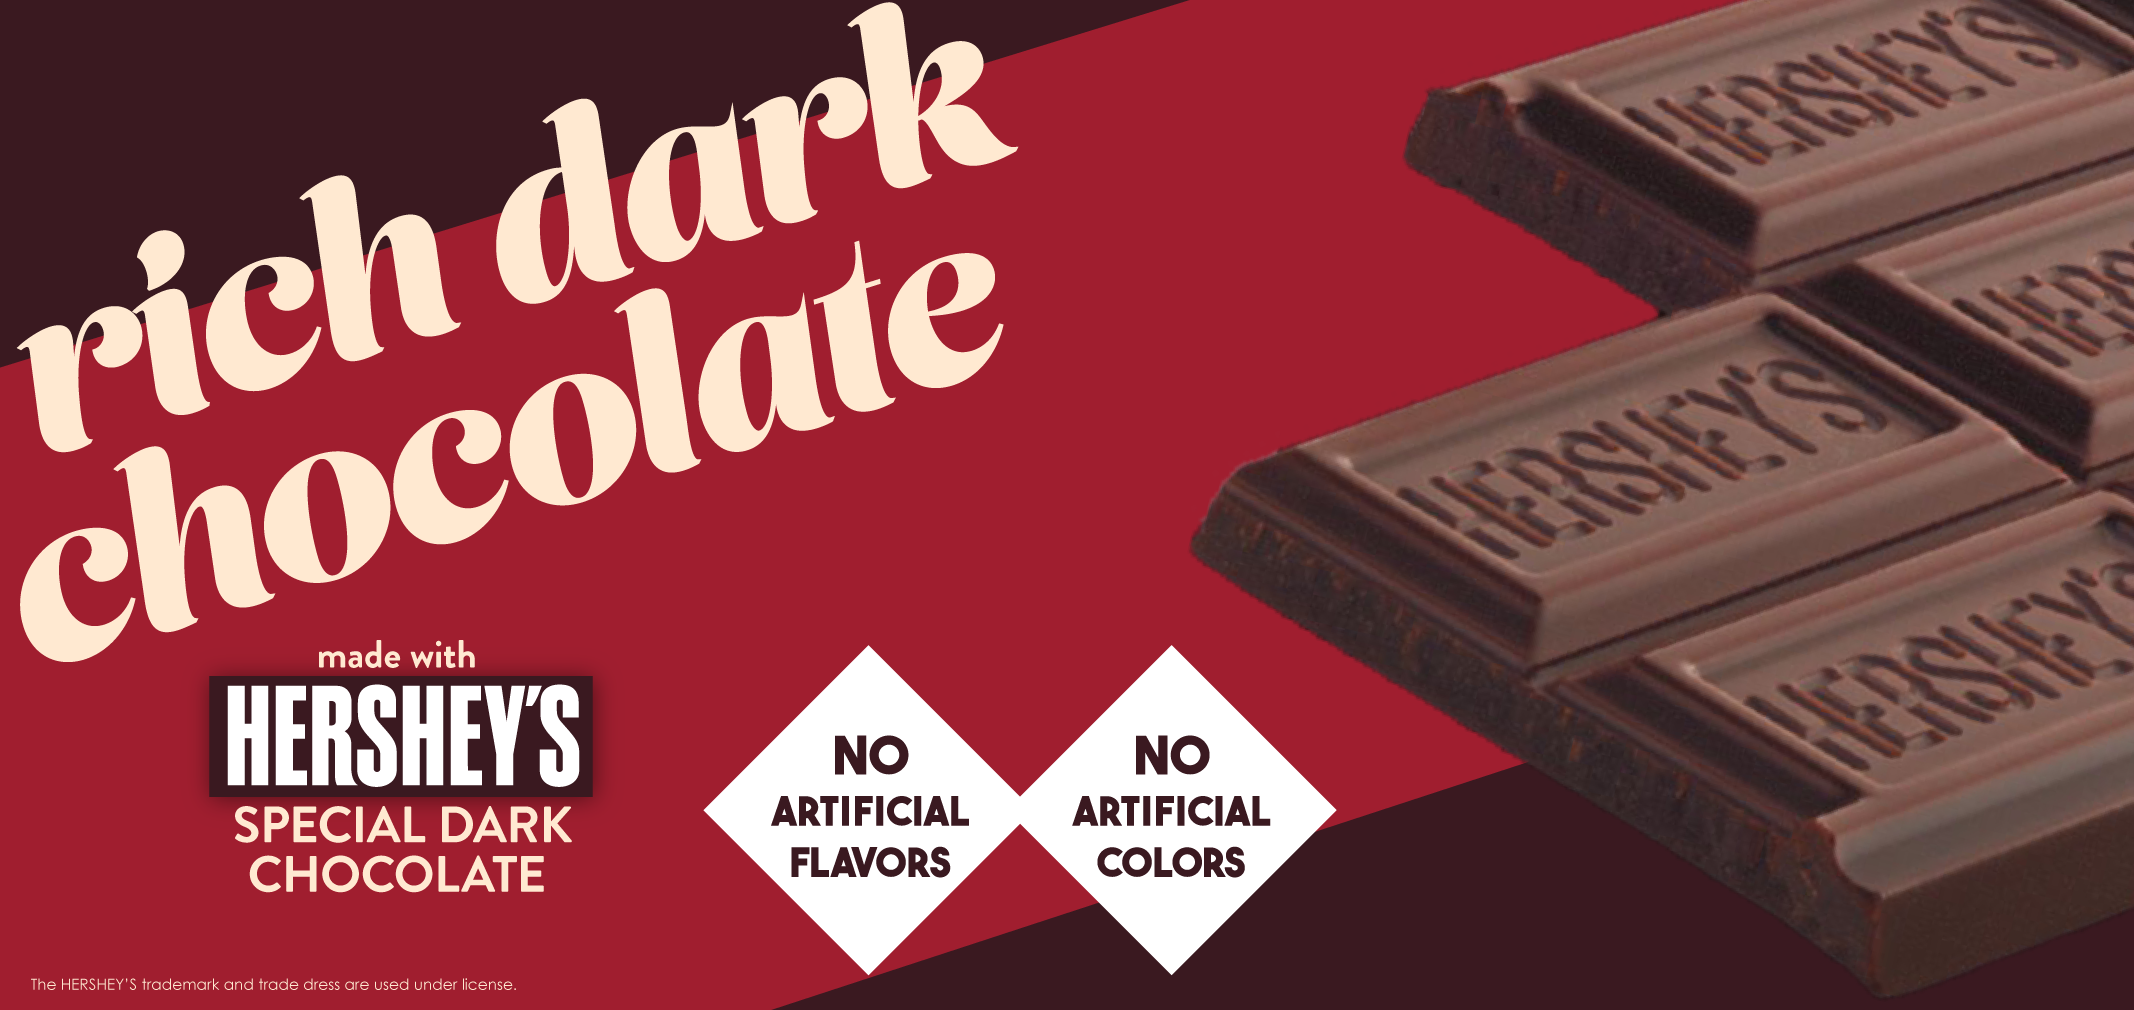 rich dark chocolate made with Hershey's® Special Dark chocolate  label image